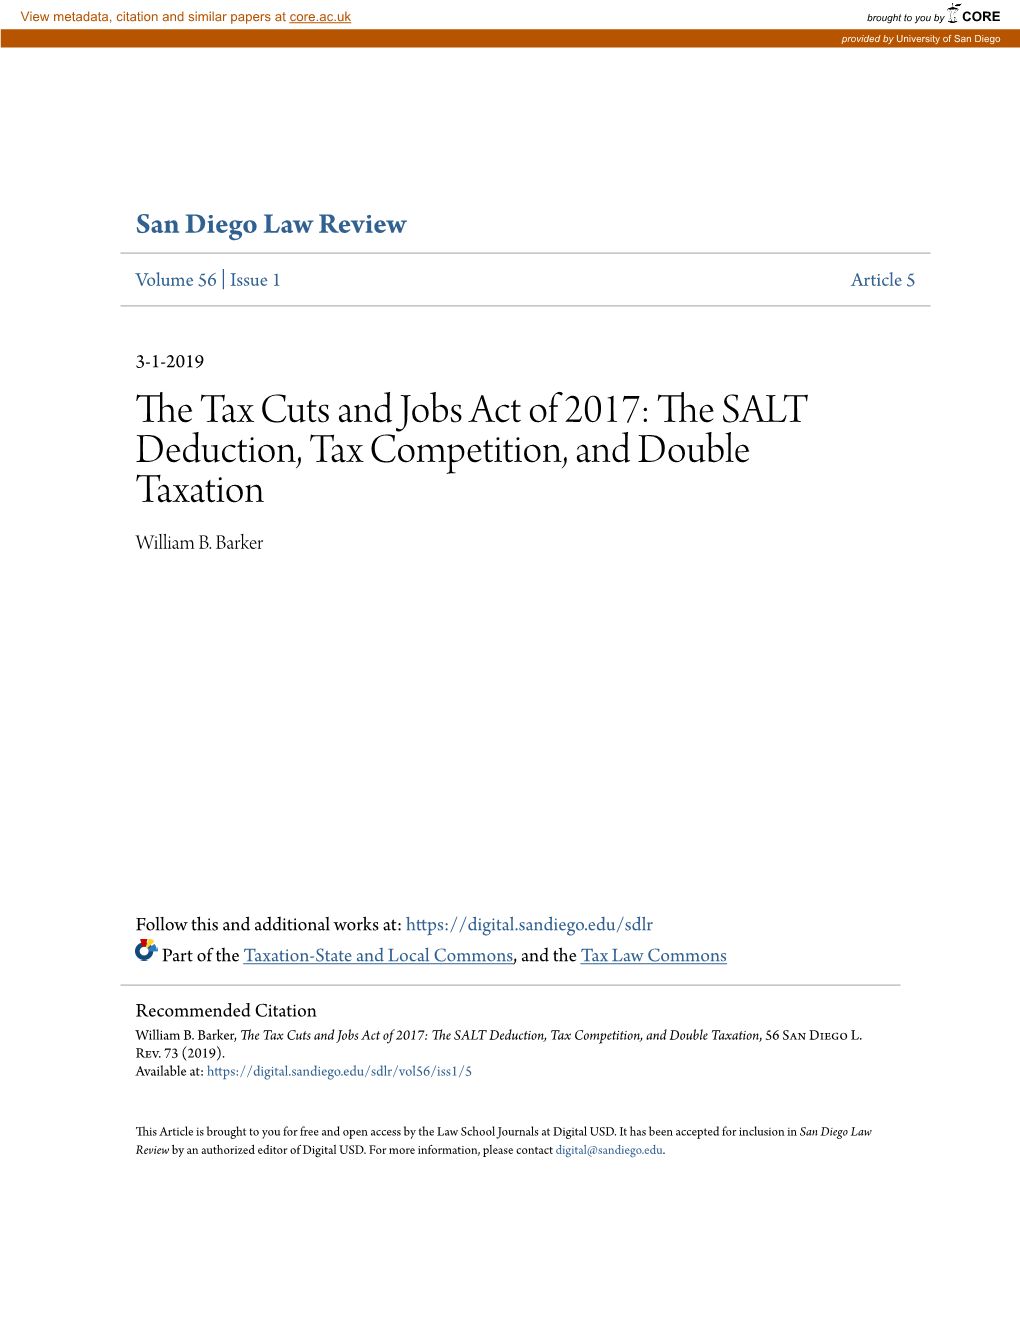 The Tax Cuts and Jobs Act of 2017: the SALT Deduction, Tax Competition, and Double Taxation, 56 San Diego L